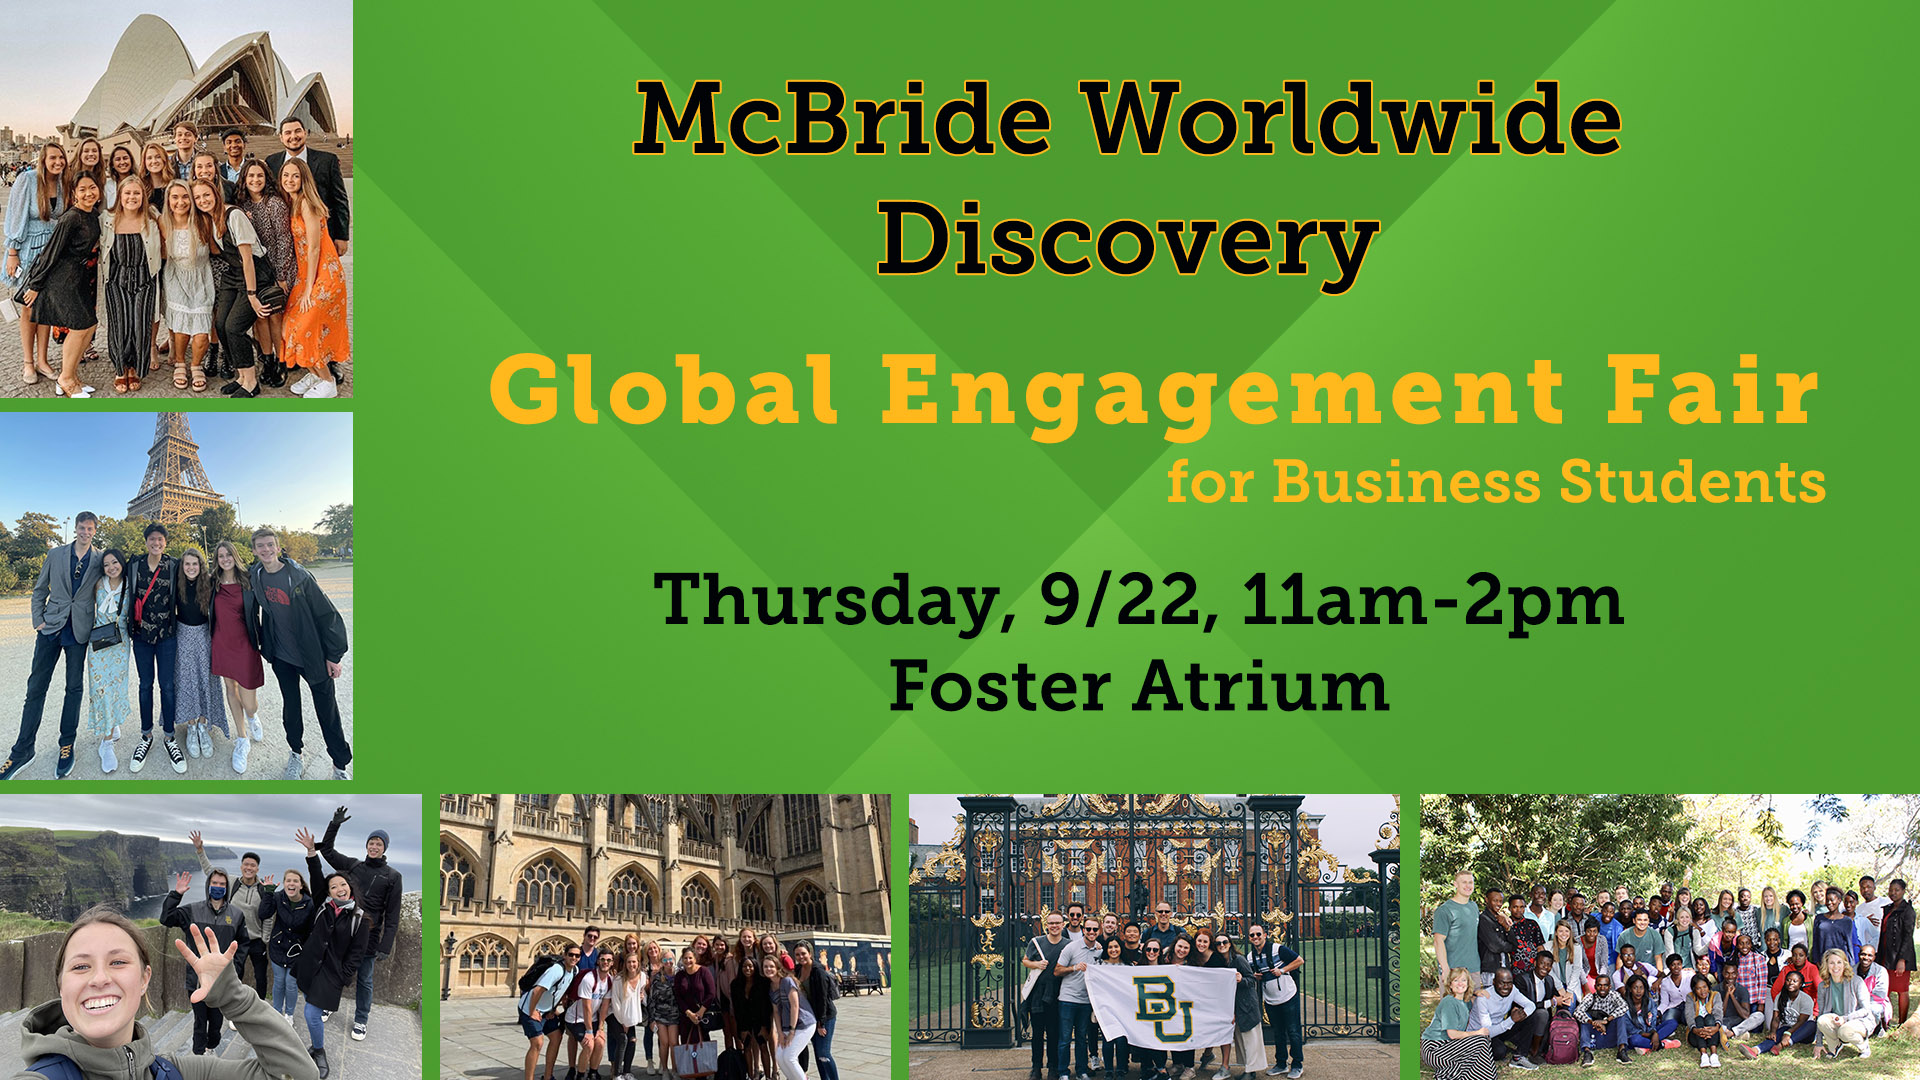 a poster of global engagement fair that says, "McBride Worldwide Discovery - Global Engagement Fair for Students - Thursday, September 22, 11am-2pm in the Foster Atrium"